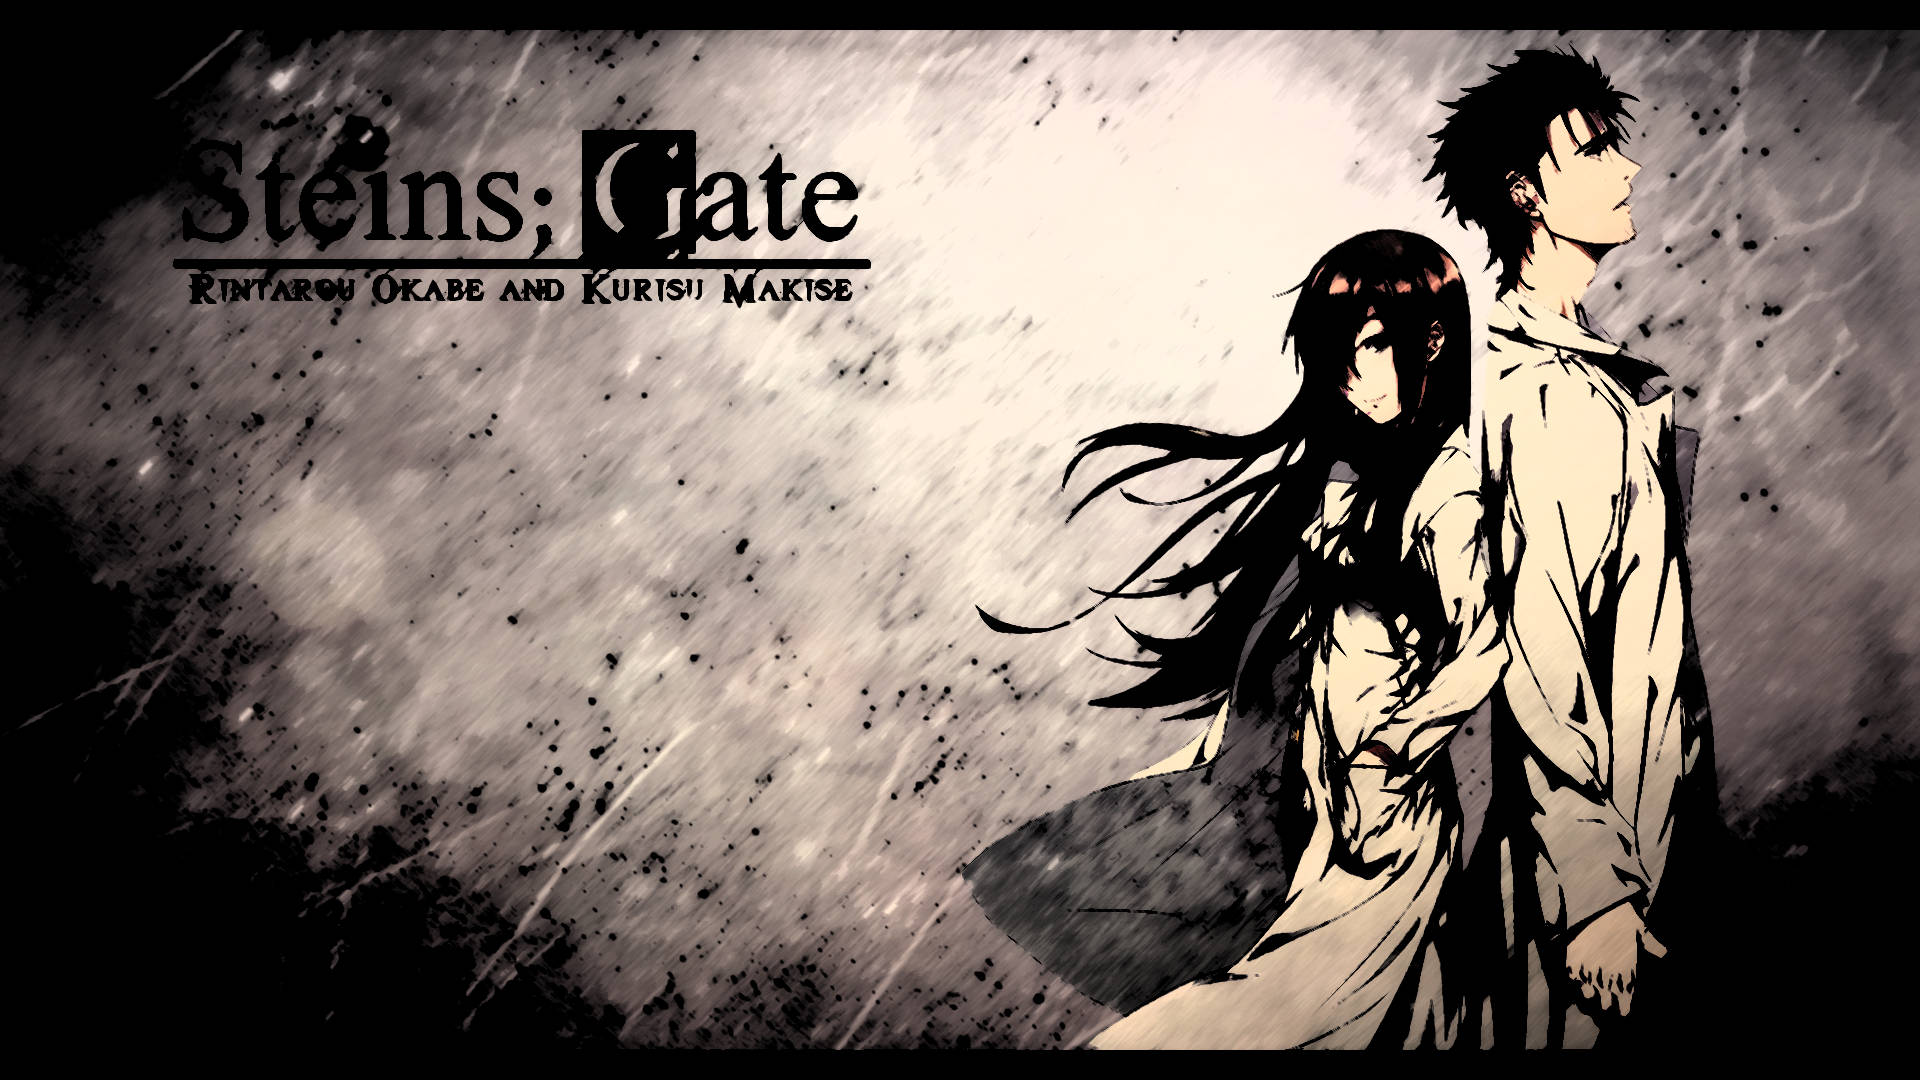 Top 999+ Steins Gate Wallpapers Full HD, 4K✅Free to Use